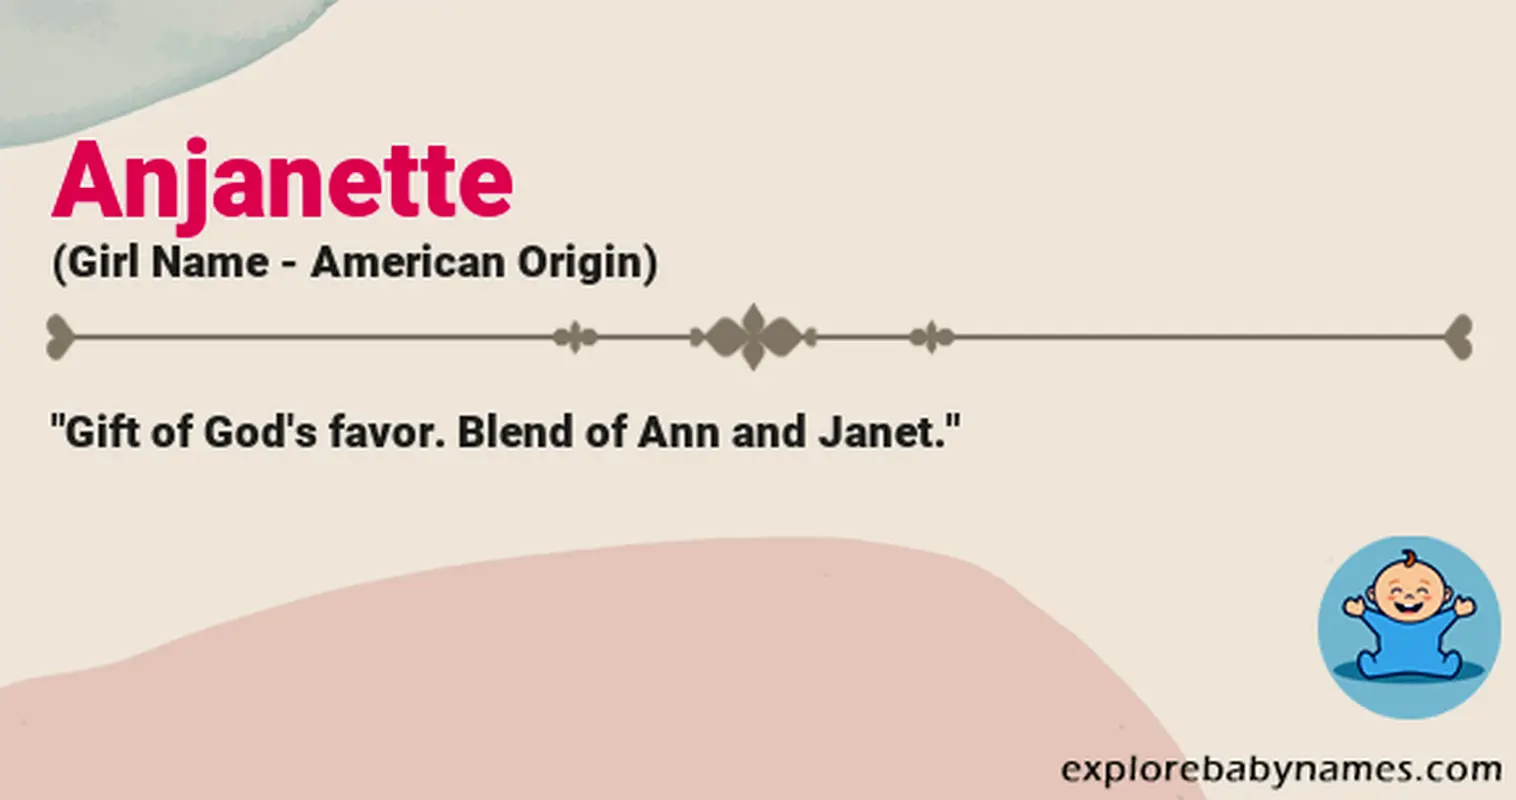 Meaning of Anjanette